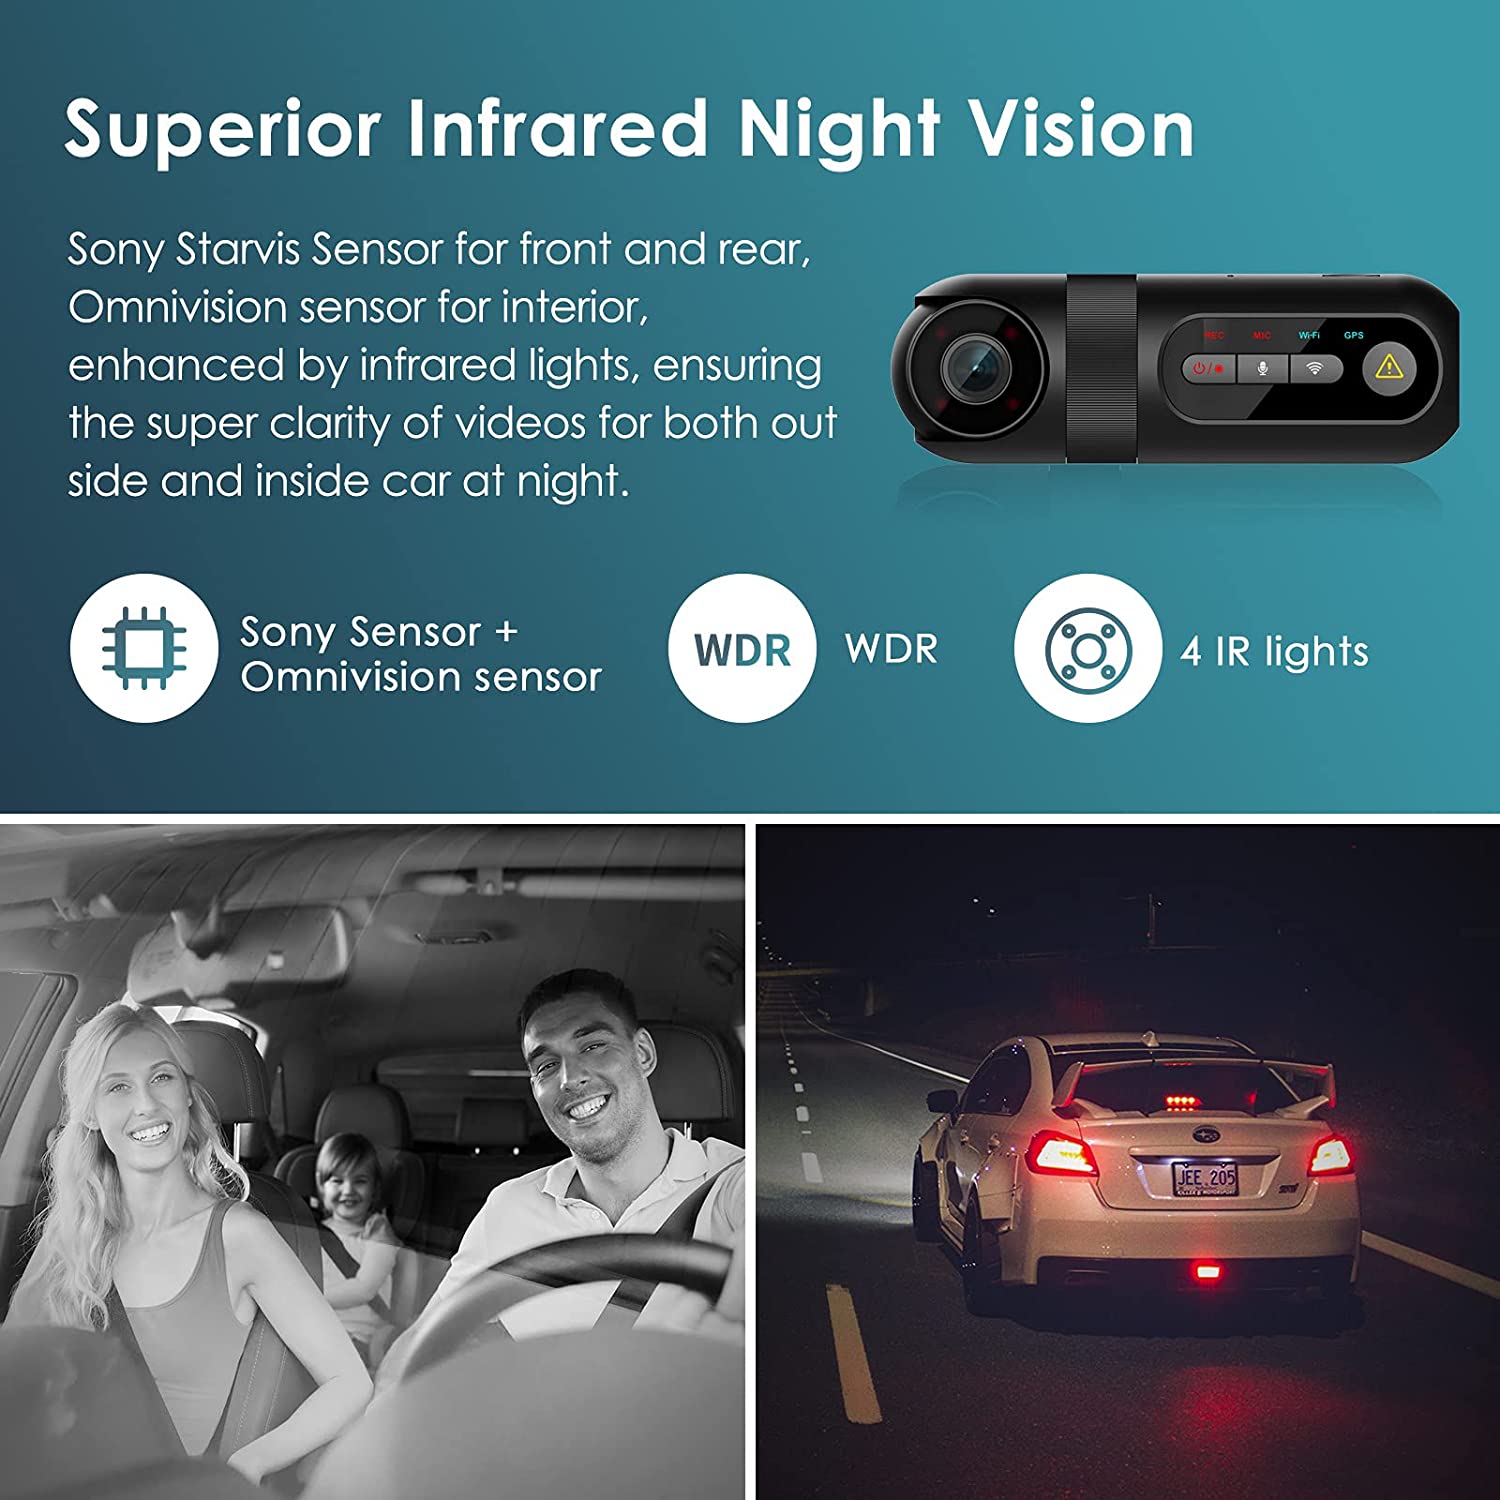 1080p FHD Built-in GPS Wi-Fi Dash Cam, Front and Inside Car Camera Recorder with Infrared Night Vision, Sony Sensor, Supercapacitor, 4 IR LEDs,G